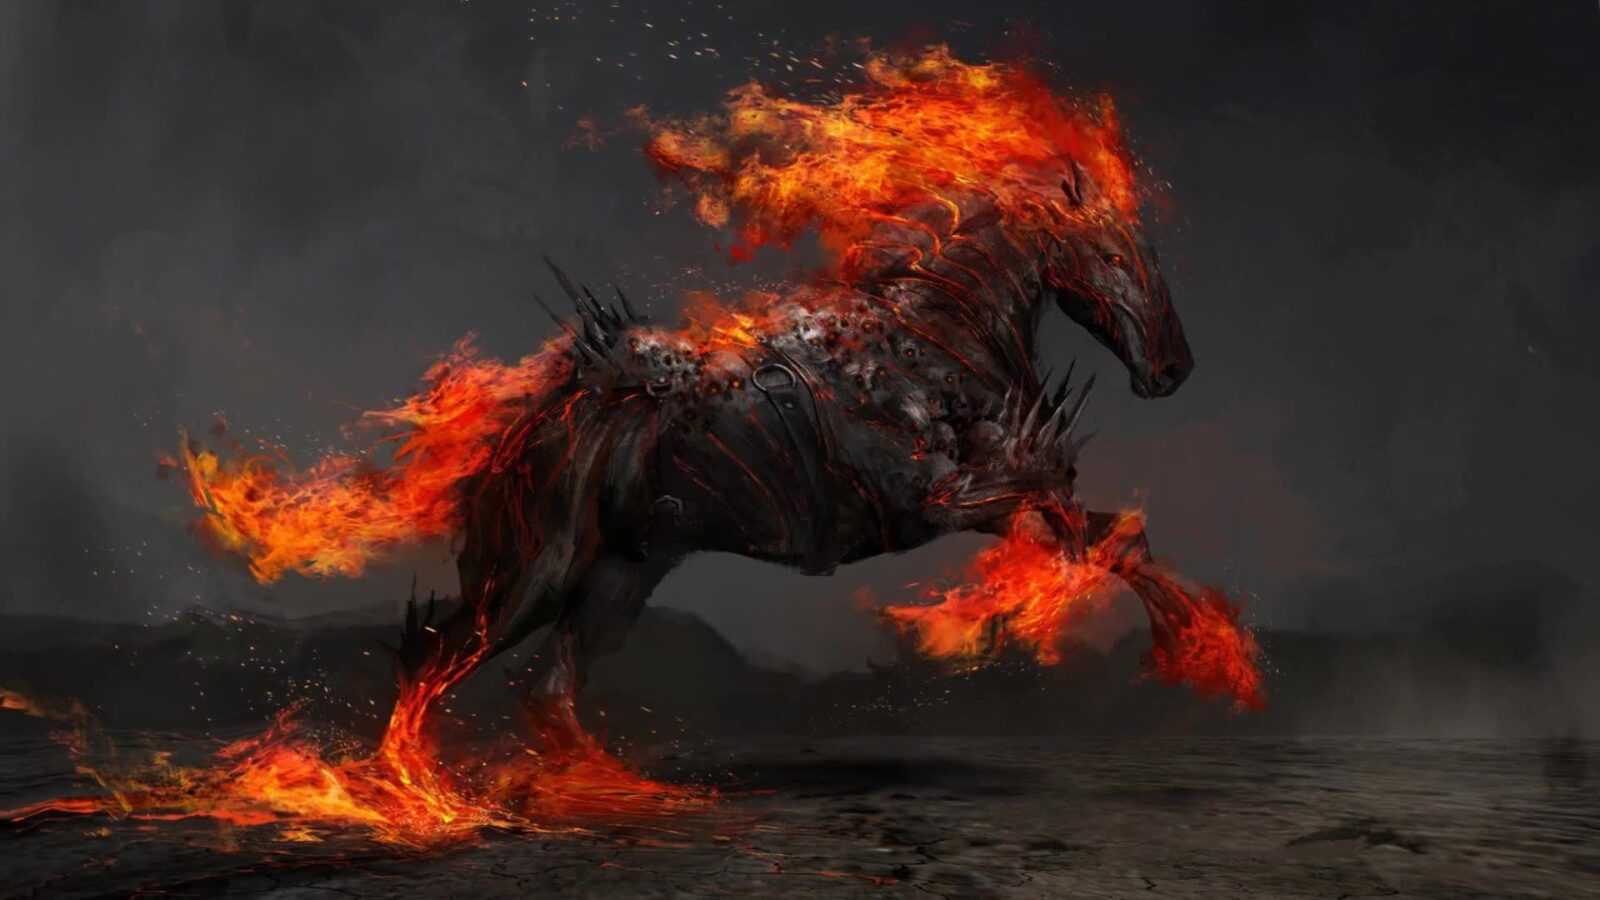 LiveWallpapers4Free.com | Running War Horse In Fire - Free Live Wallpaper